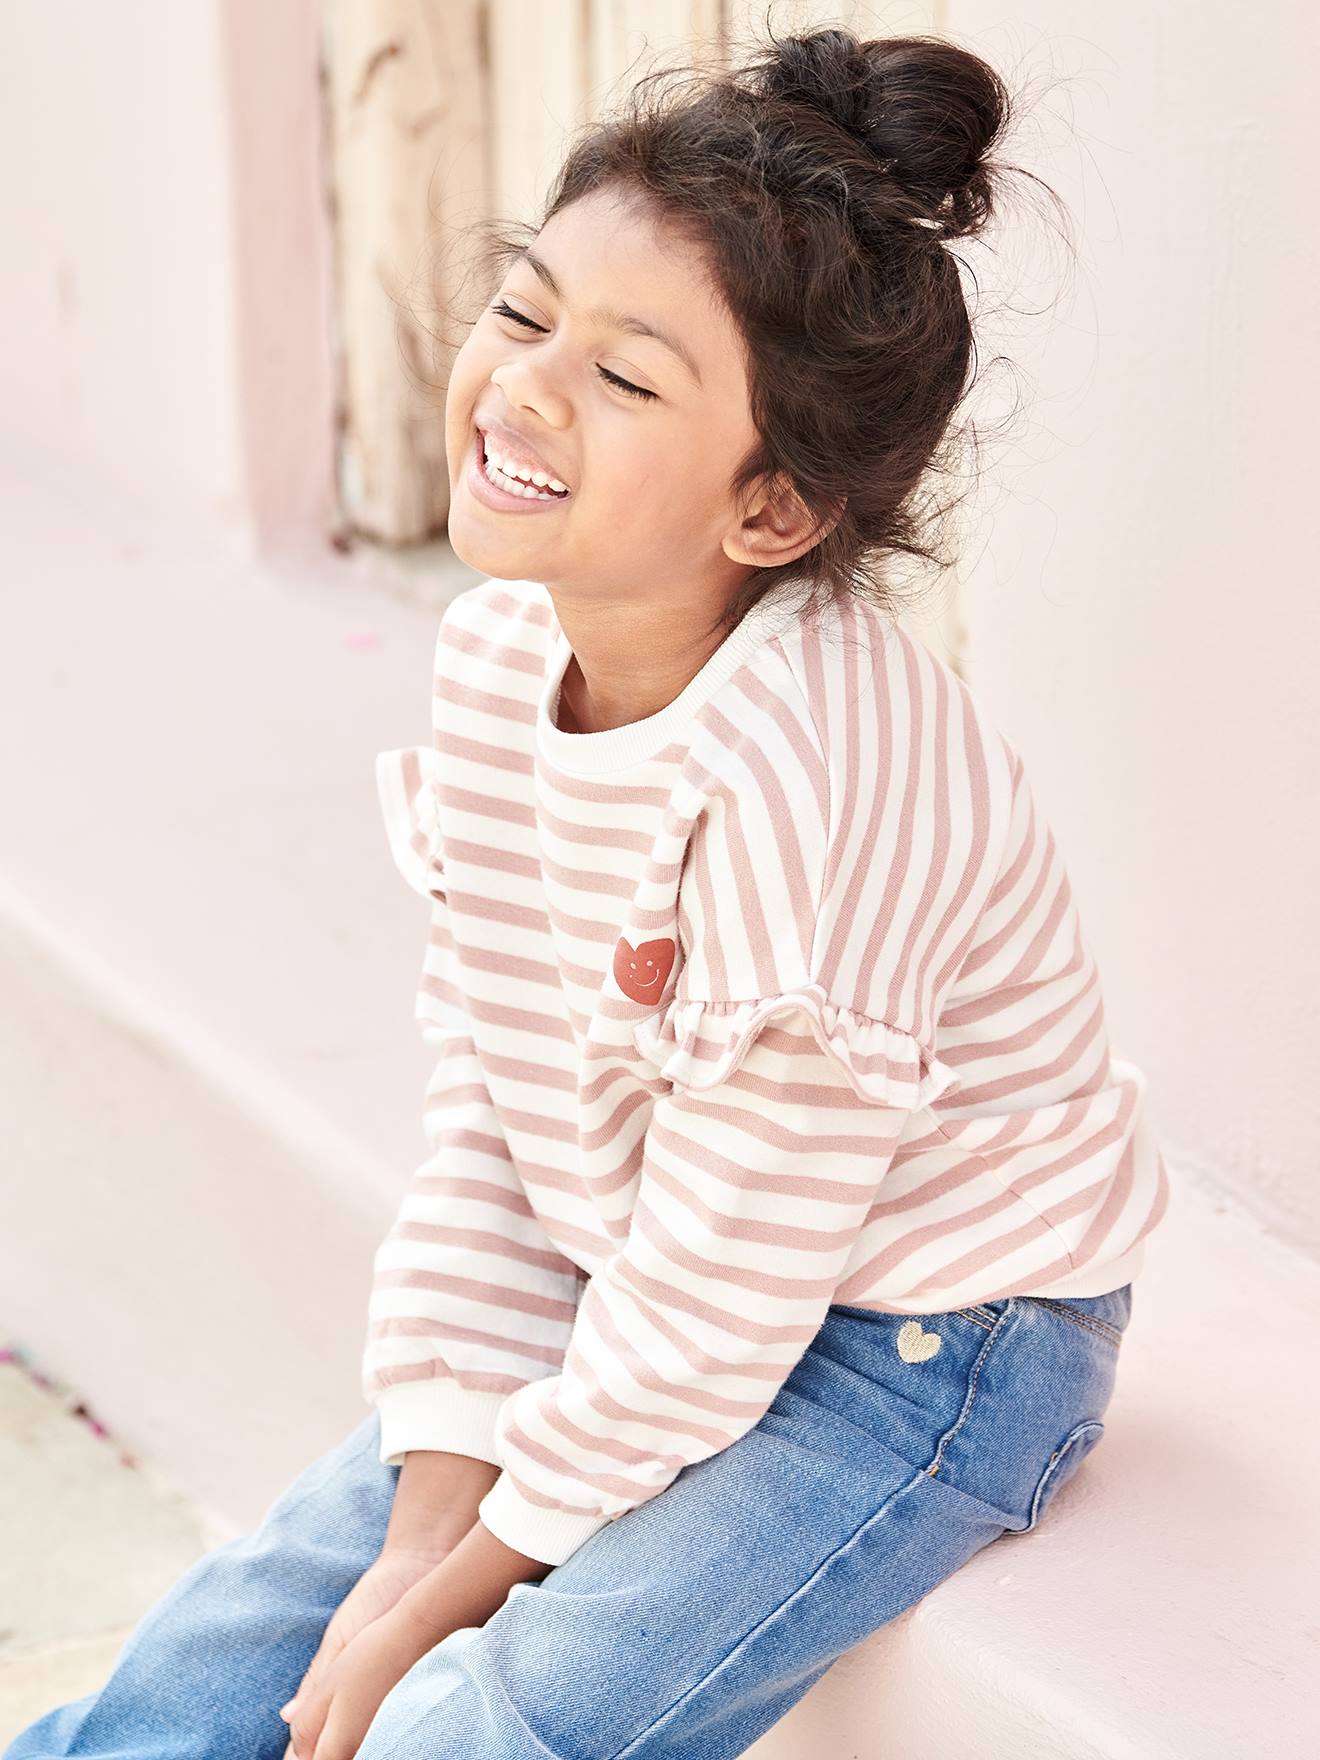 Sailor-type Sweatshirt with Ruffles on the Sleeves, for Girls striped pink